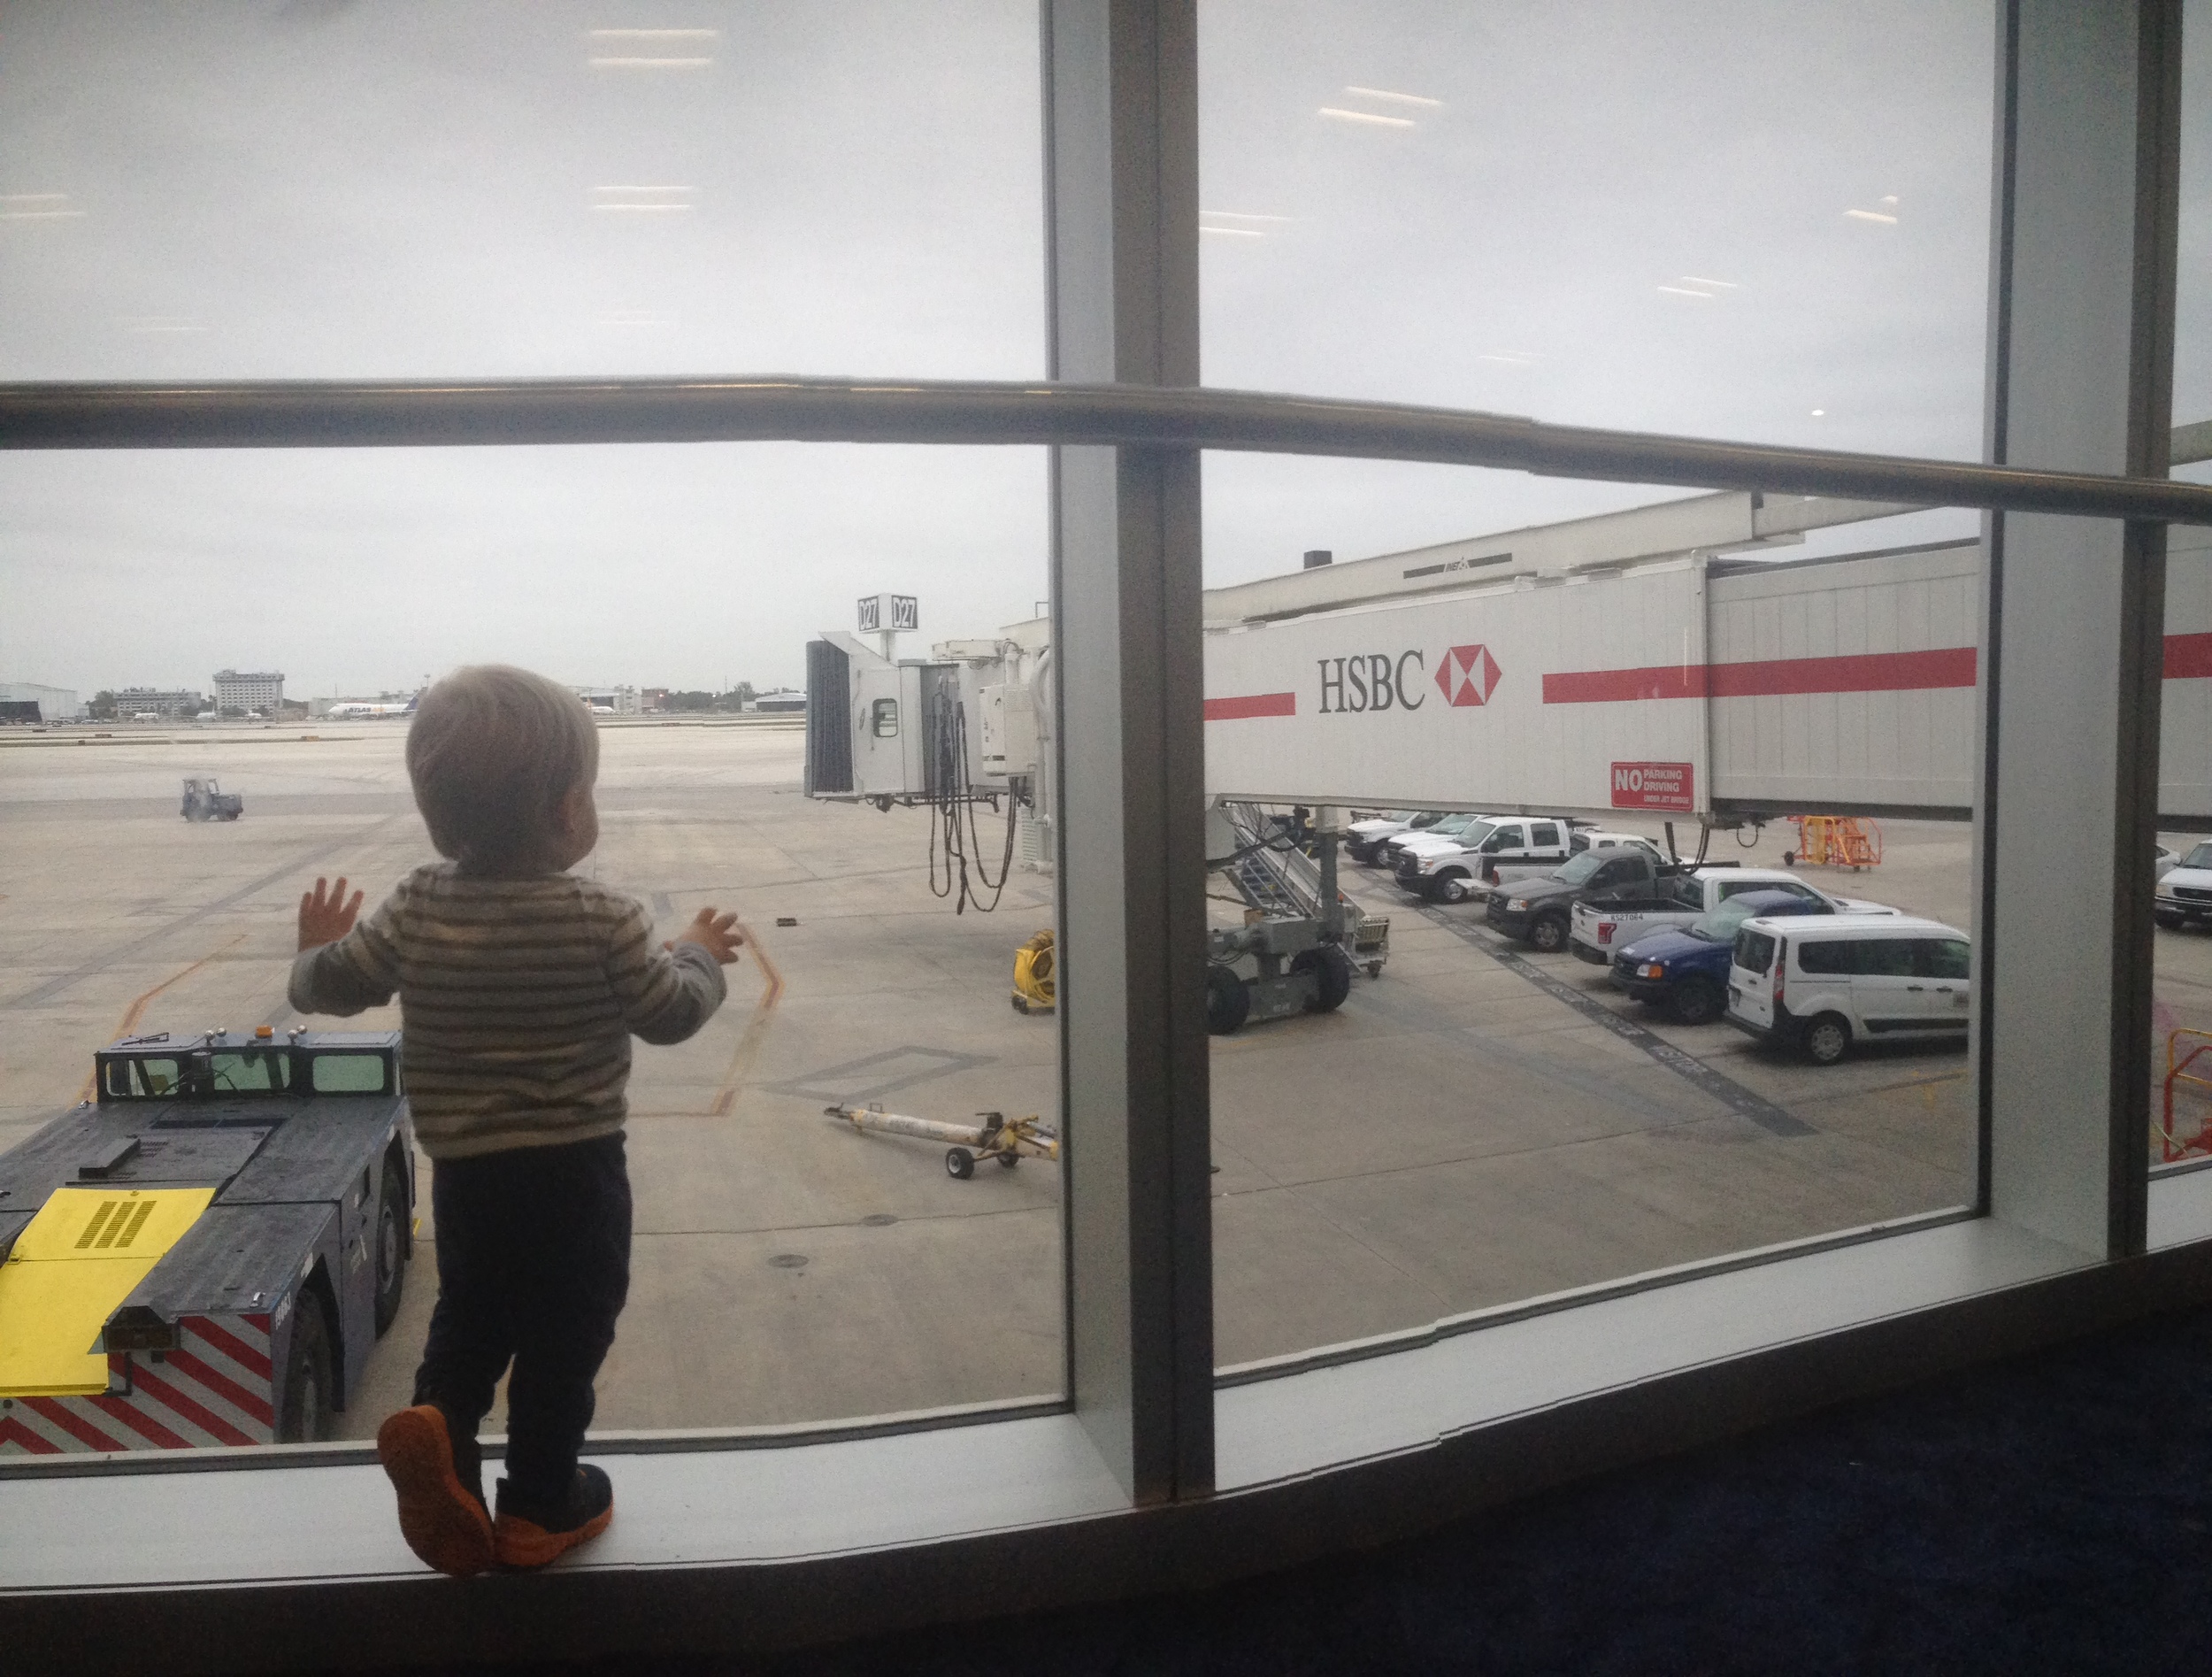 Here's little Ian in awe of the airport.